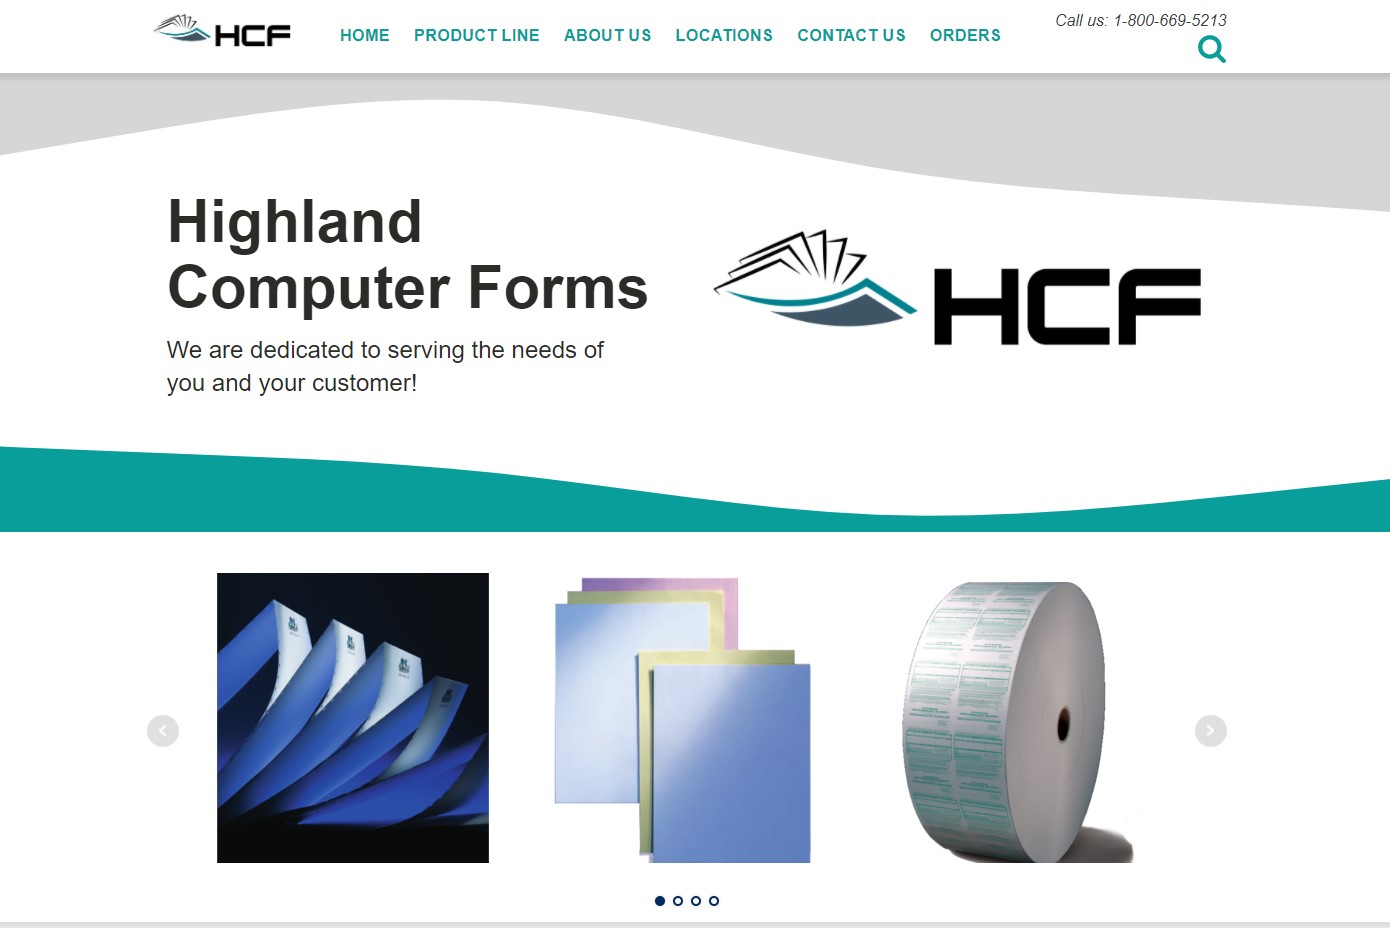 The homepage of Highland Computer Forms